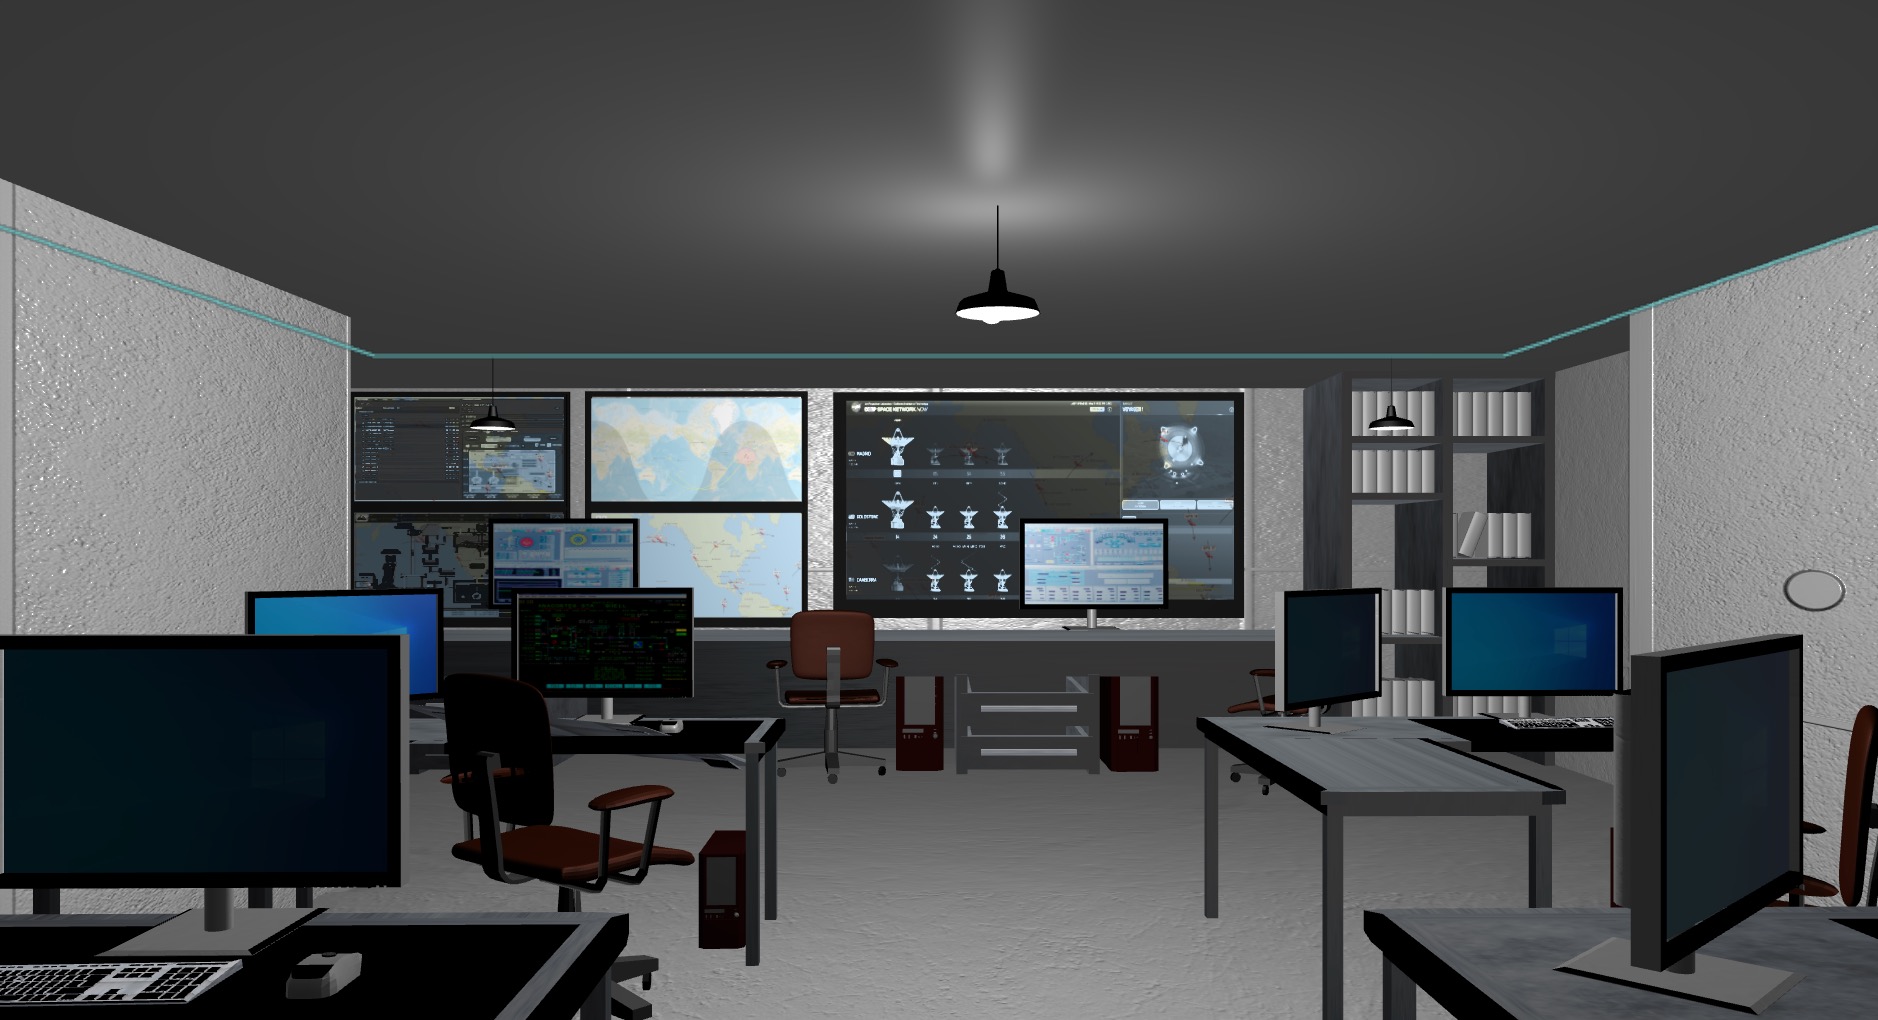 A virtual rendering of a satellite command center, featuring empty desks and large computer monitors